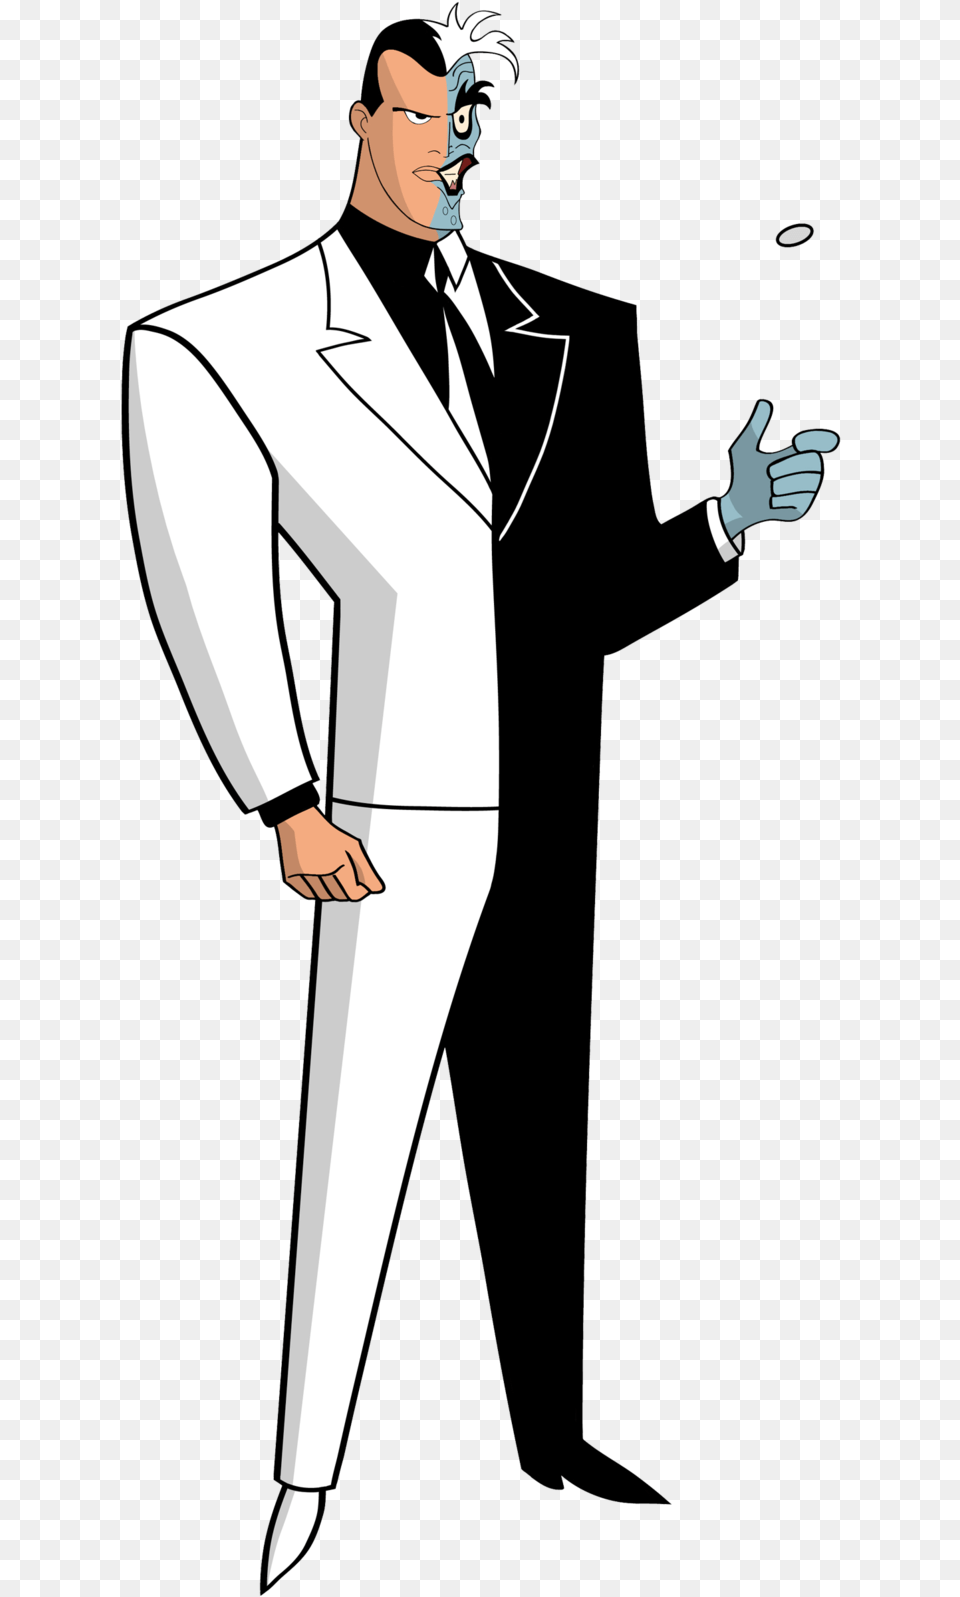 Thumb Animated Cartoon Two Face, Tuxedo, Clothing, Suit, Formal Wear Png Image